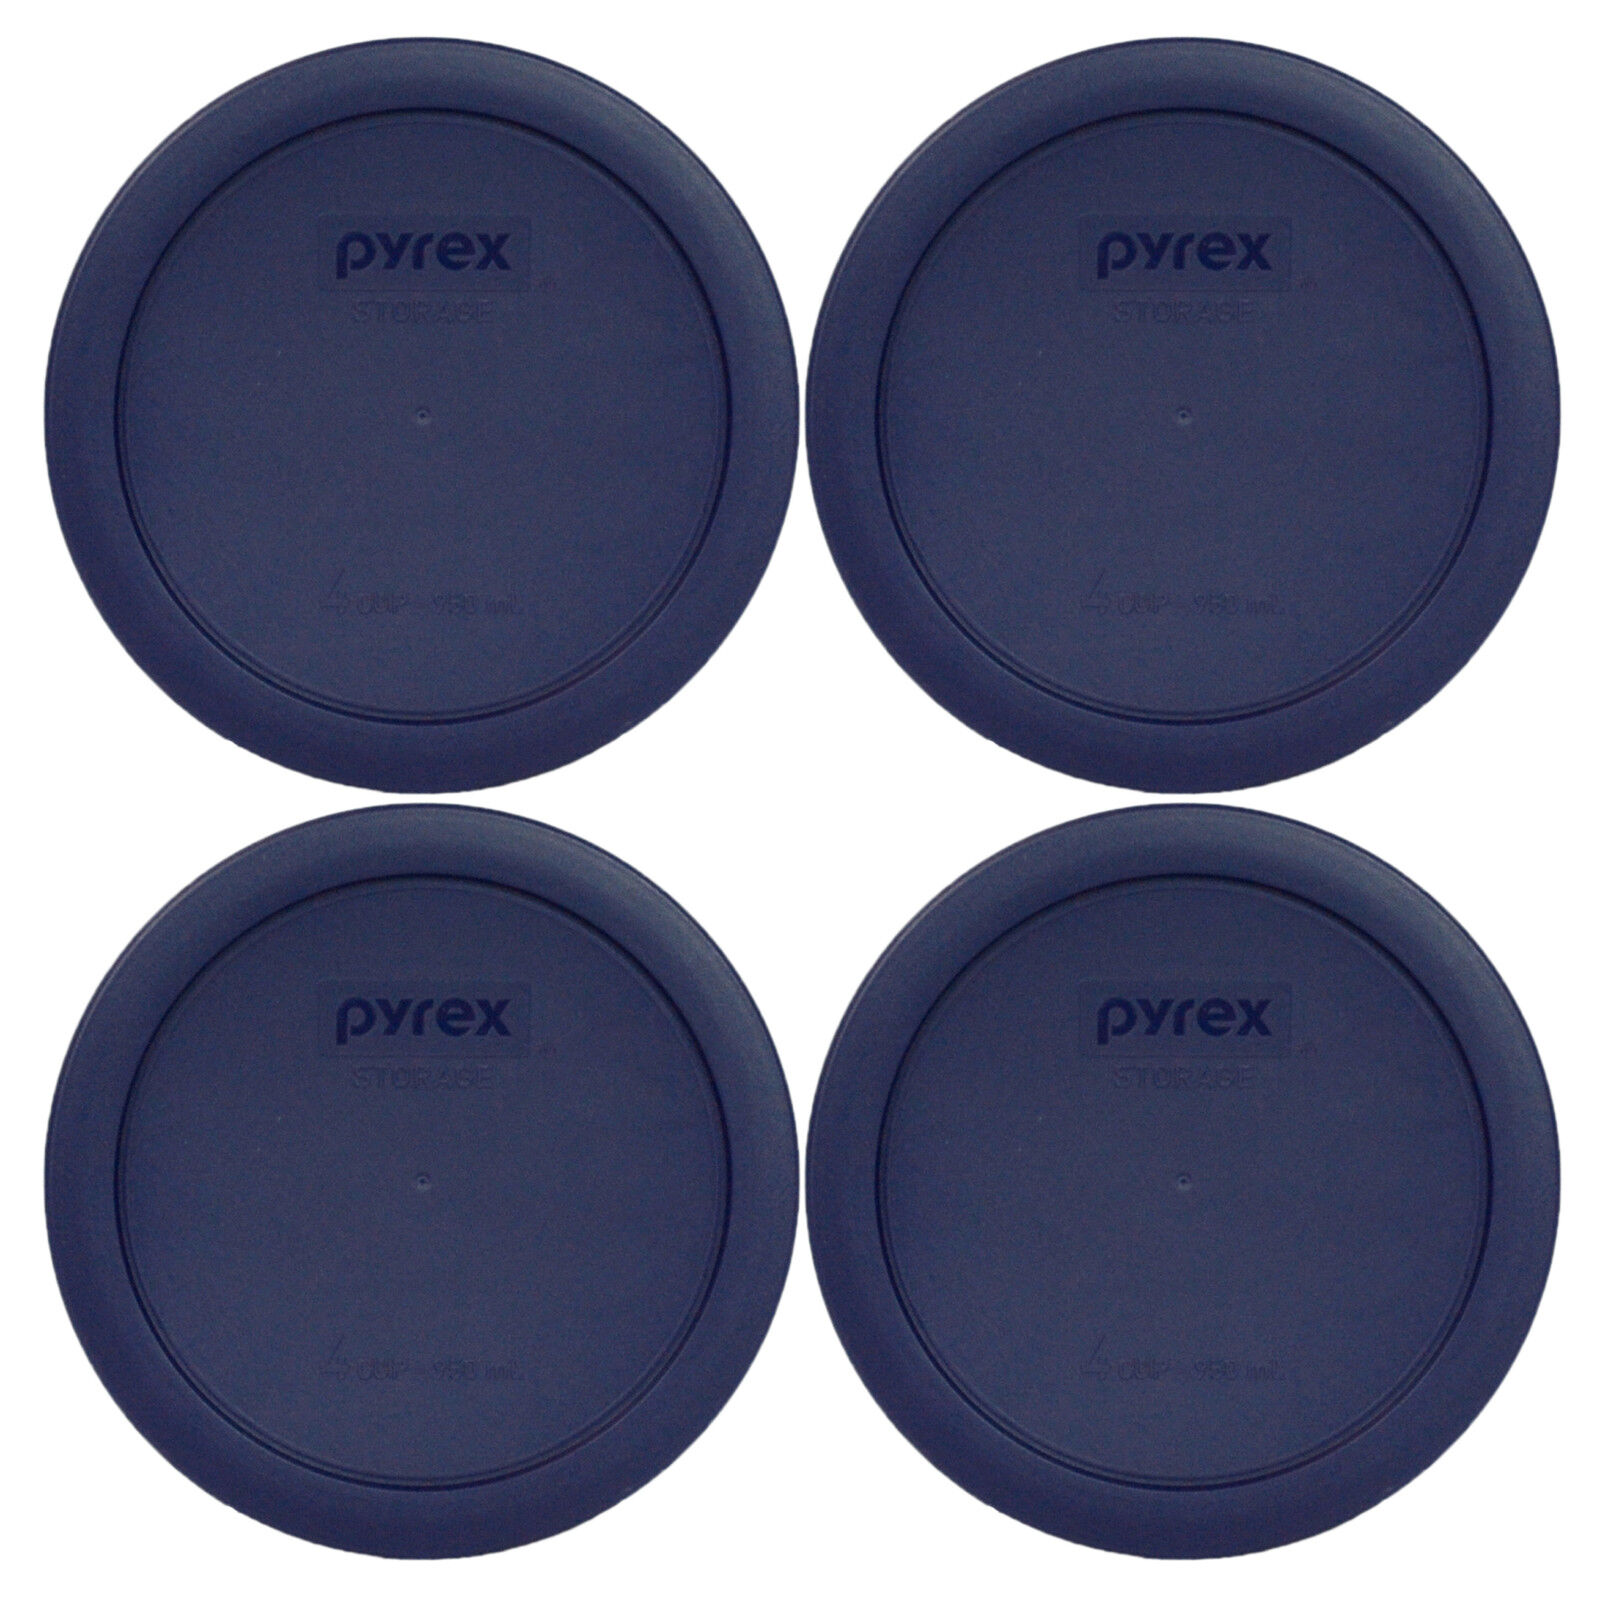 Pyrex 7201-PC Round 4 Cup Blue Food Storage Lid Cover for 7201 Dish (4 Pack) Pyrex 7201PC